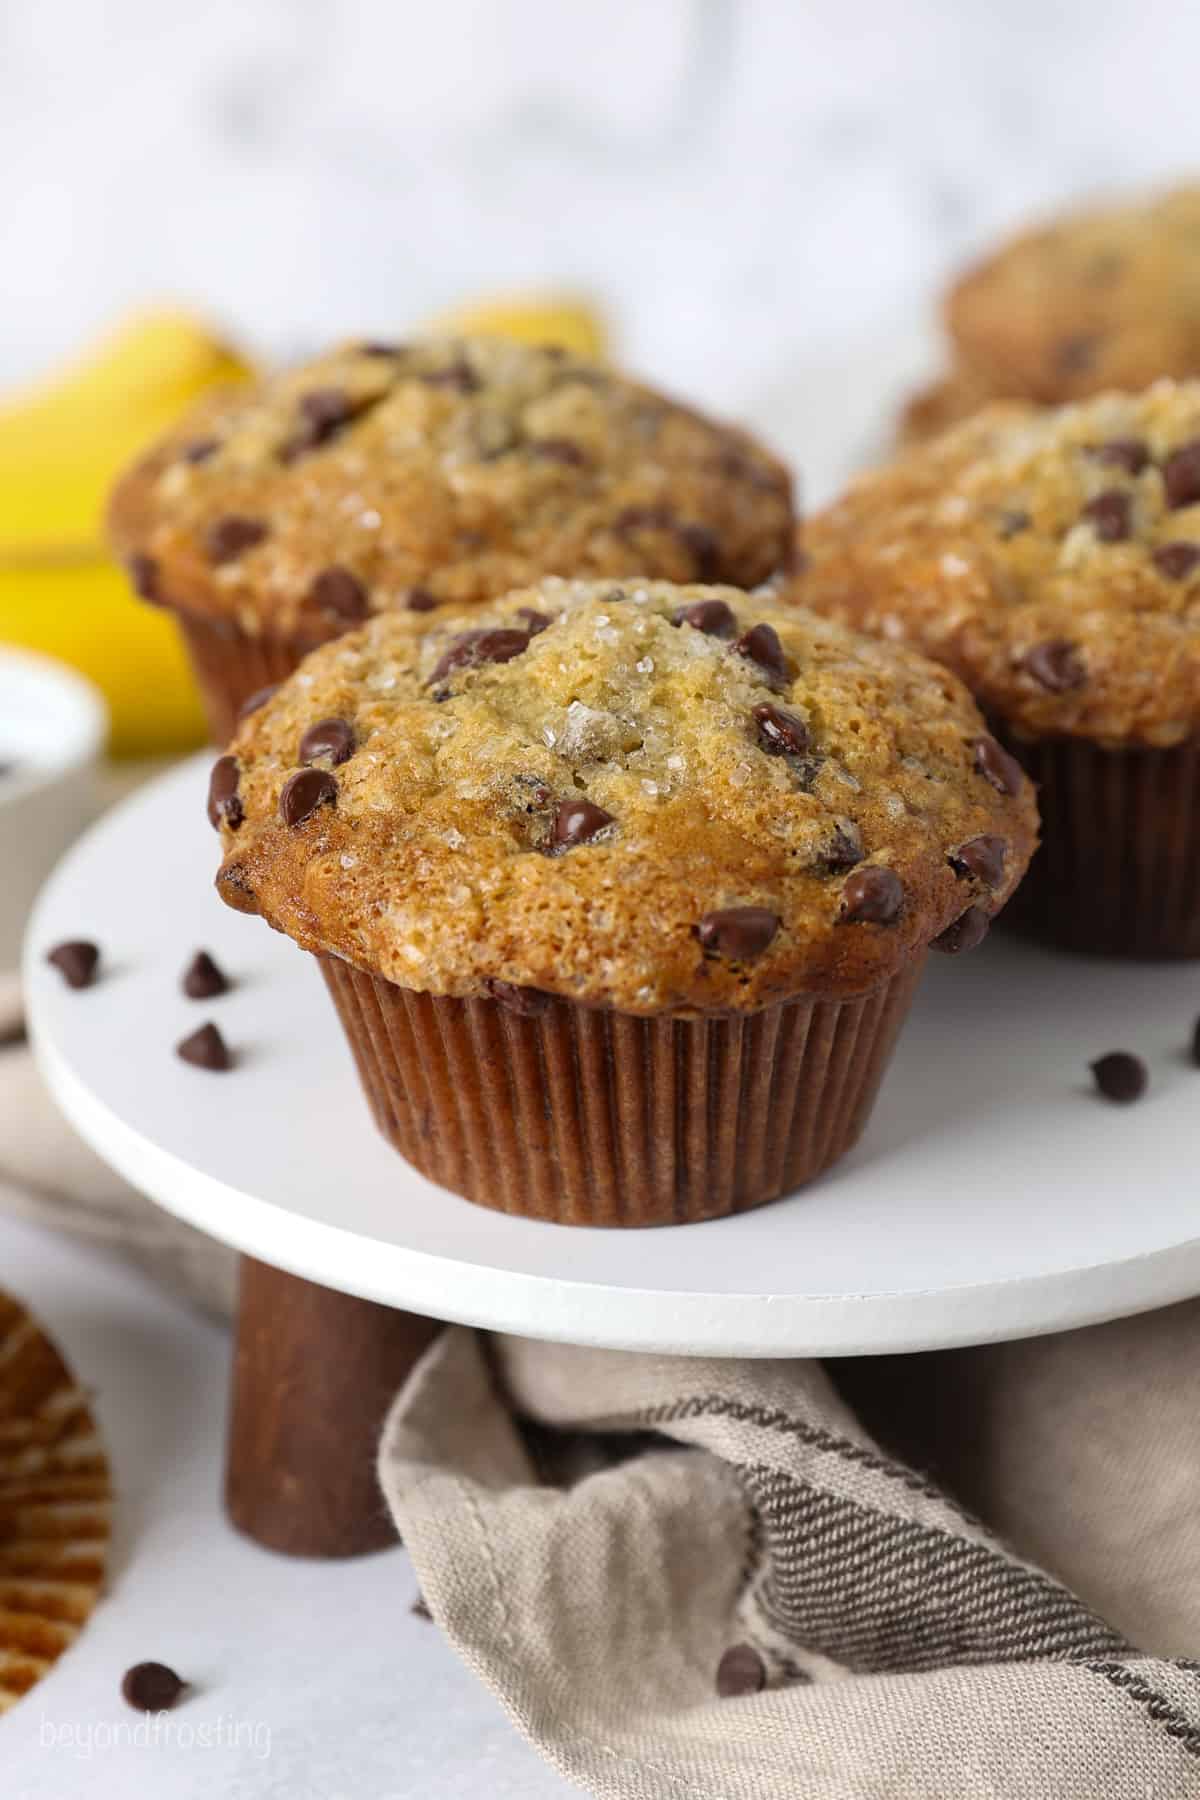 Banana chocolate chip muffins on a white cake stand.